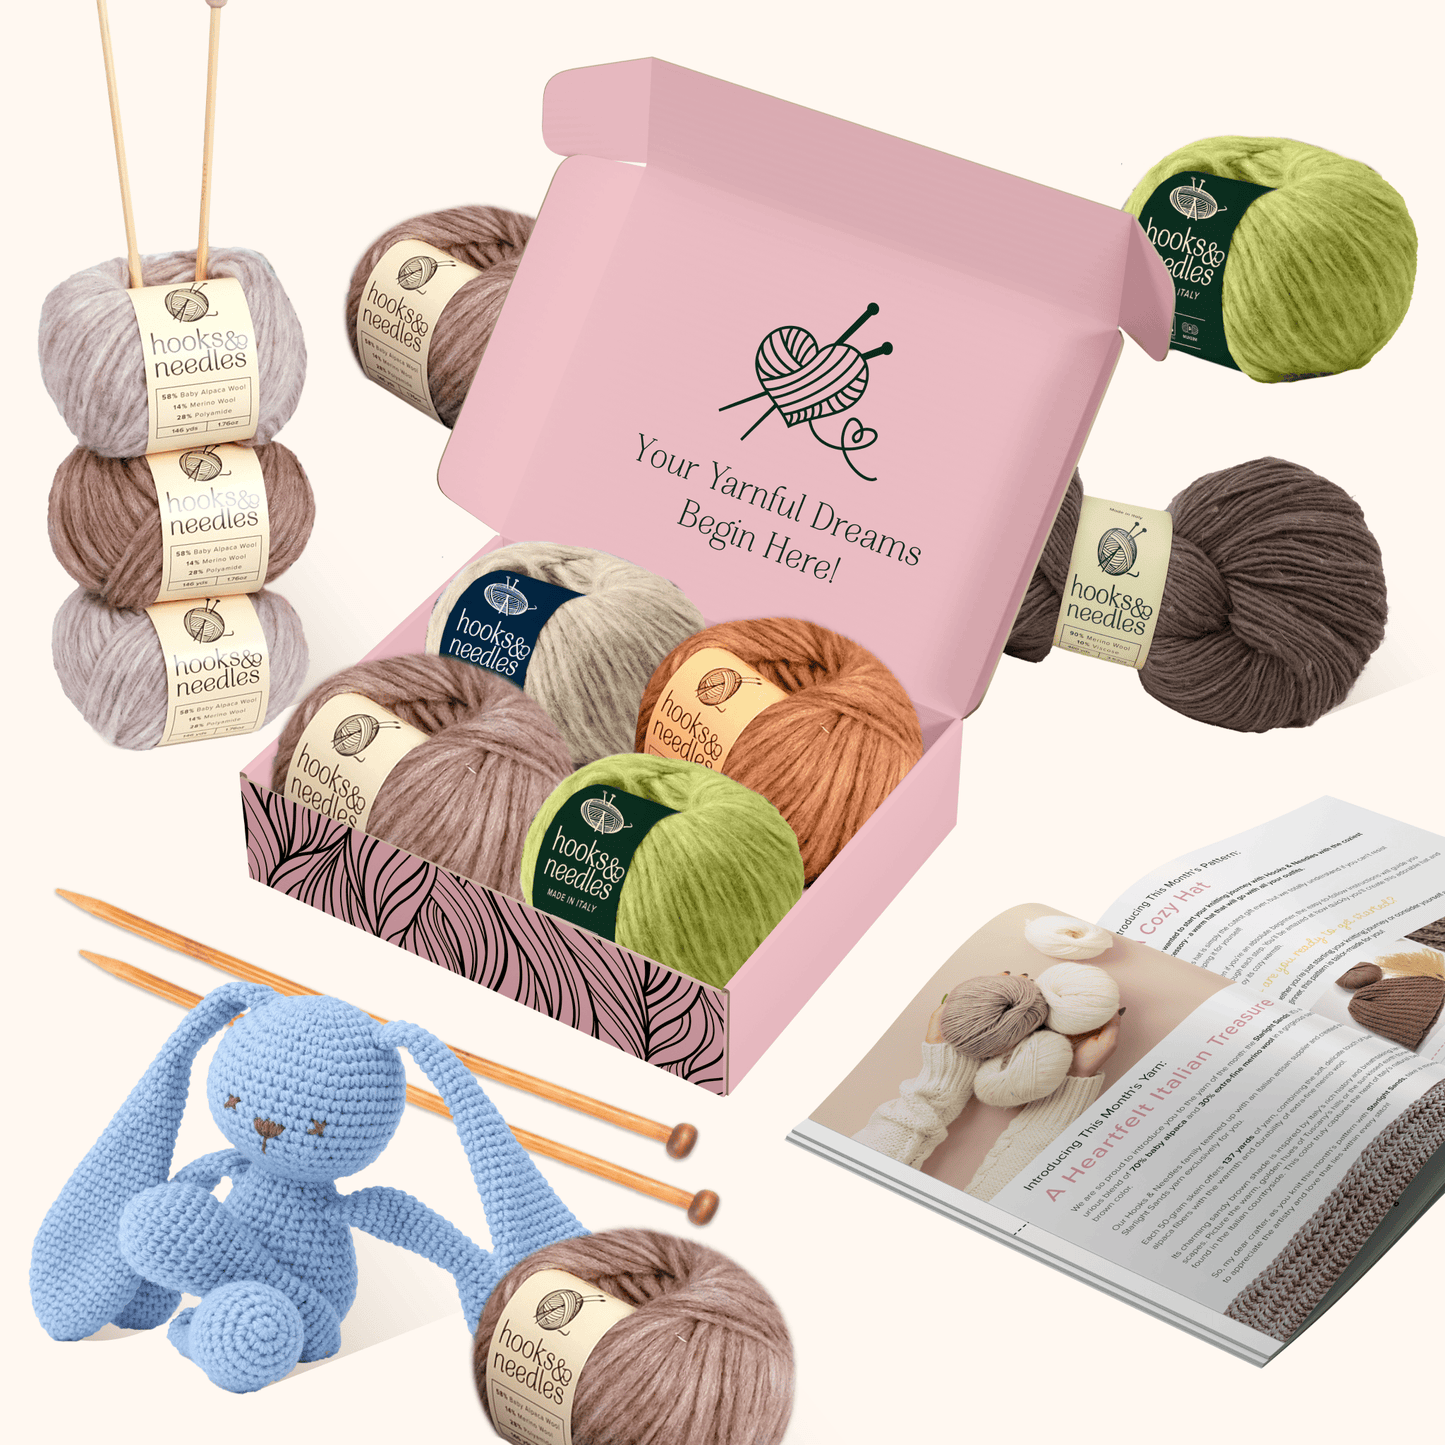 A [6-Month-Prepaid] Hooks & Needles Subscription Box #7 starter kit featuring yarn in various colors, crochet hooks, a pattern book, and a completed blue crochet bunny, displayed with a slogan "your yarnful dreams begin here!.